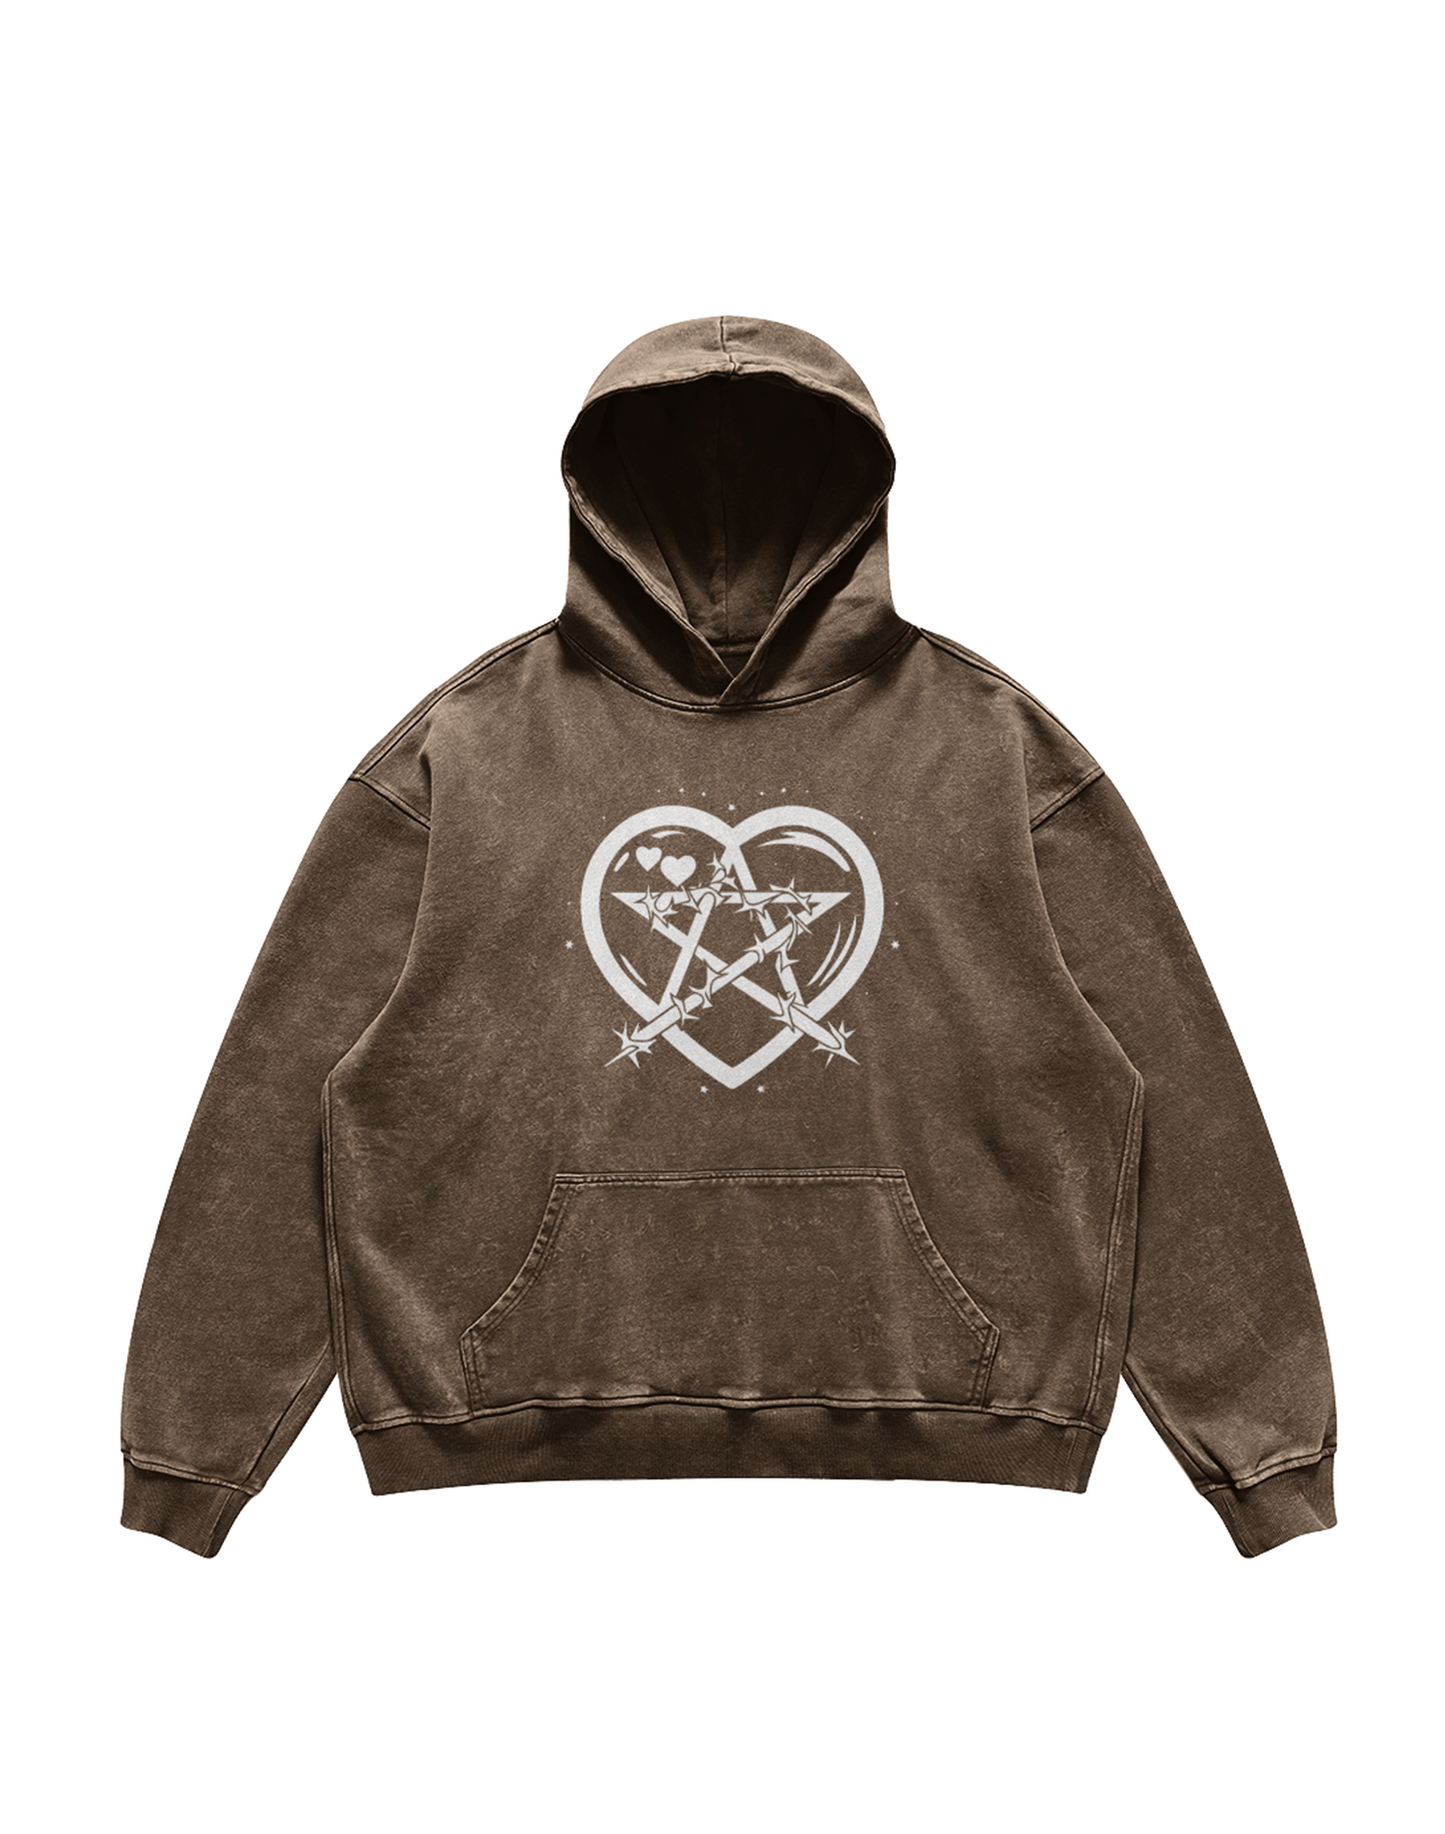 Heart of Thorns Hoodie with unique heart and thorns design from Supersede Official